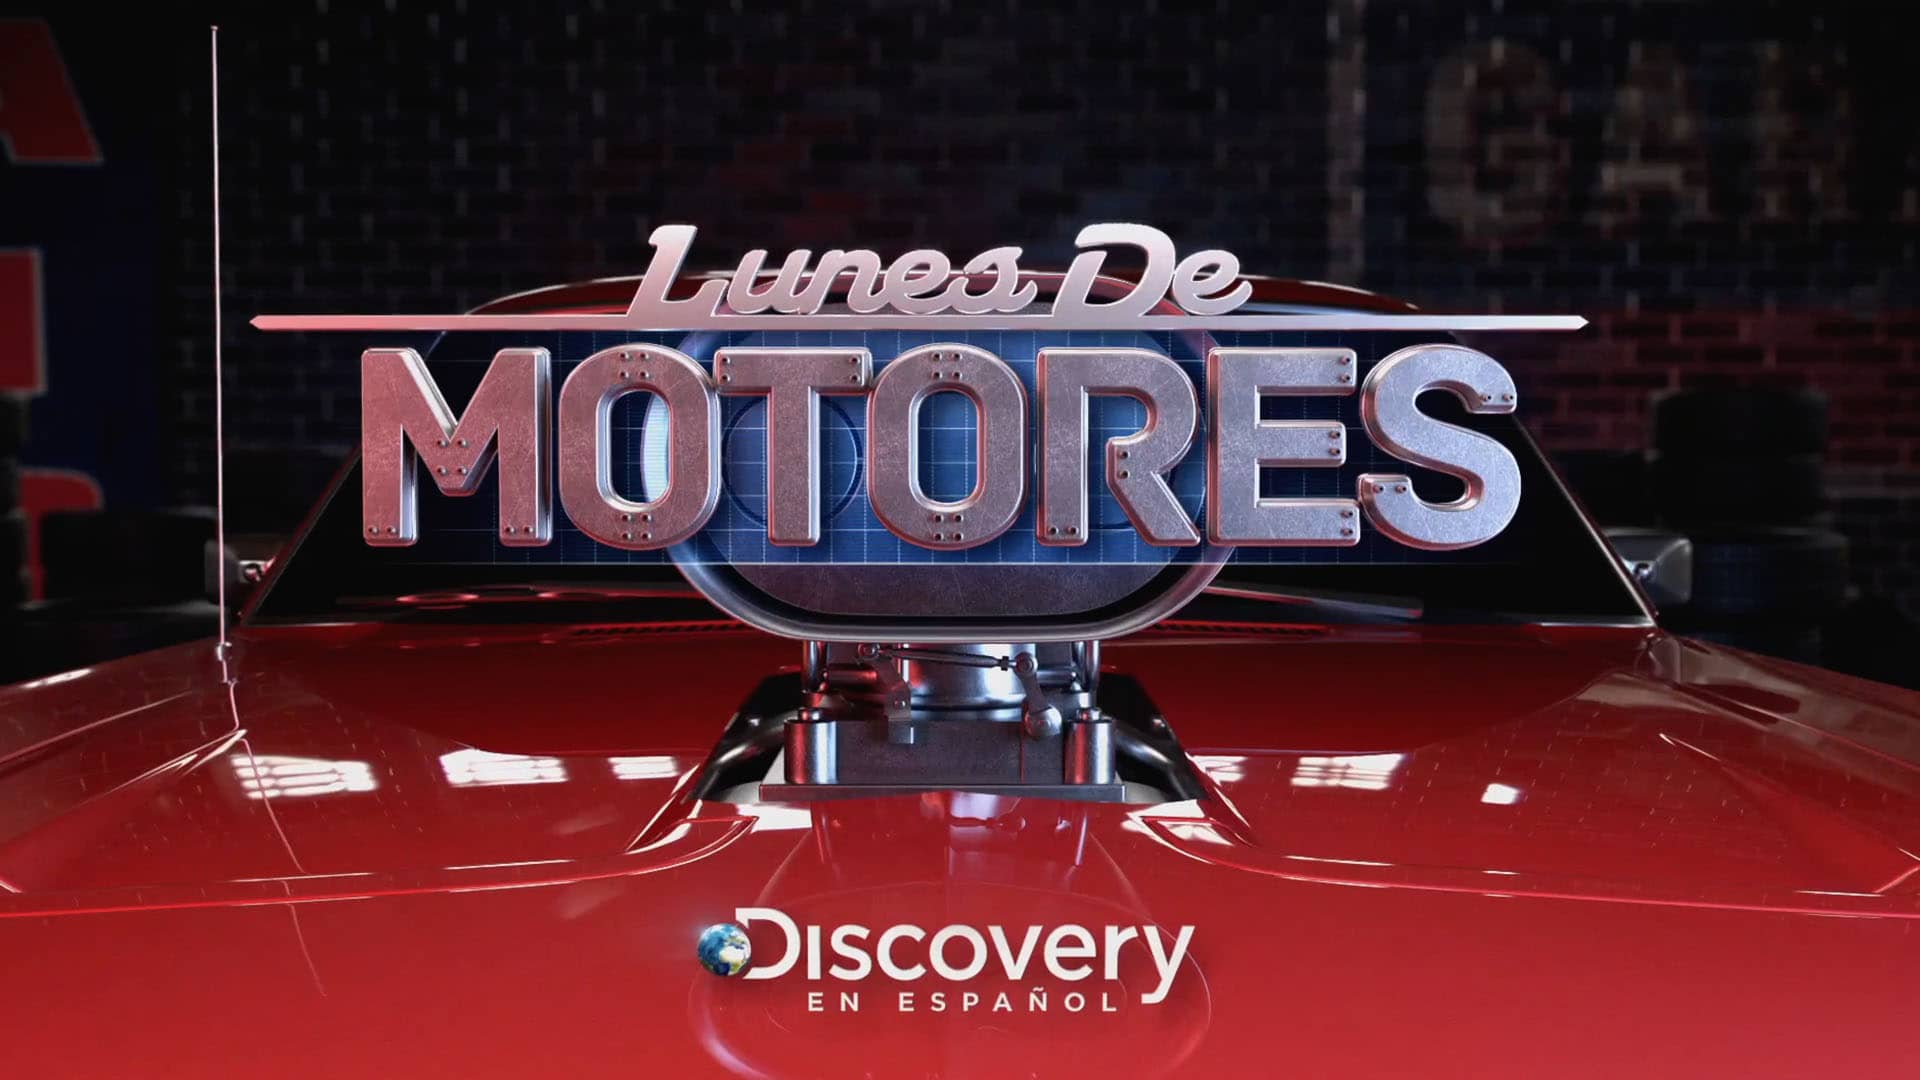 Lunes de Motores and Discovery en Espanol graphic insert, over a tuned-up red racing car